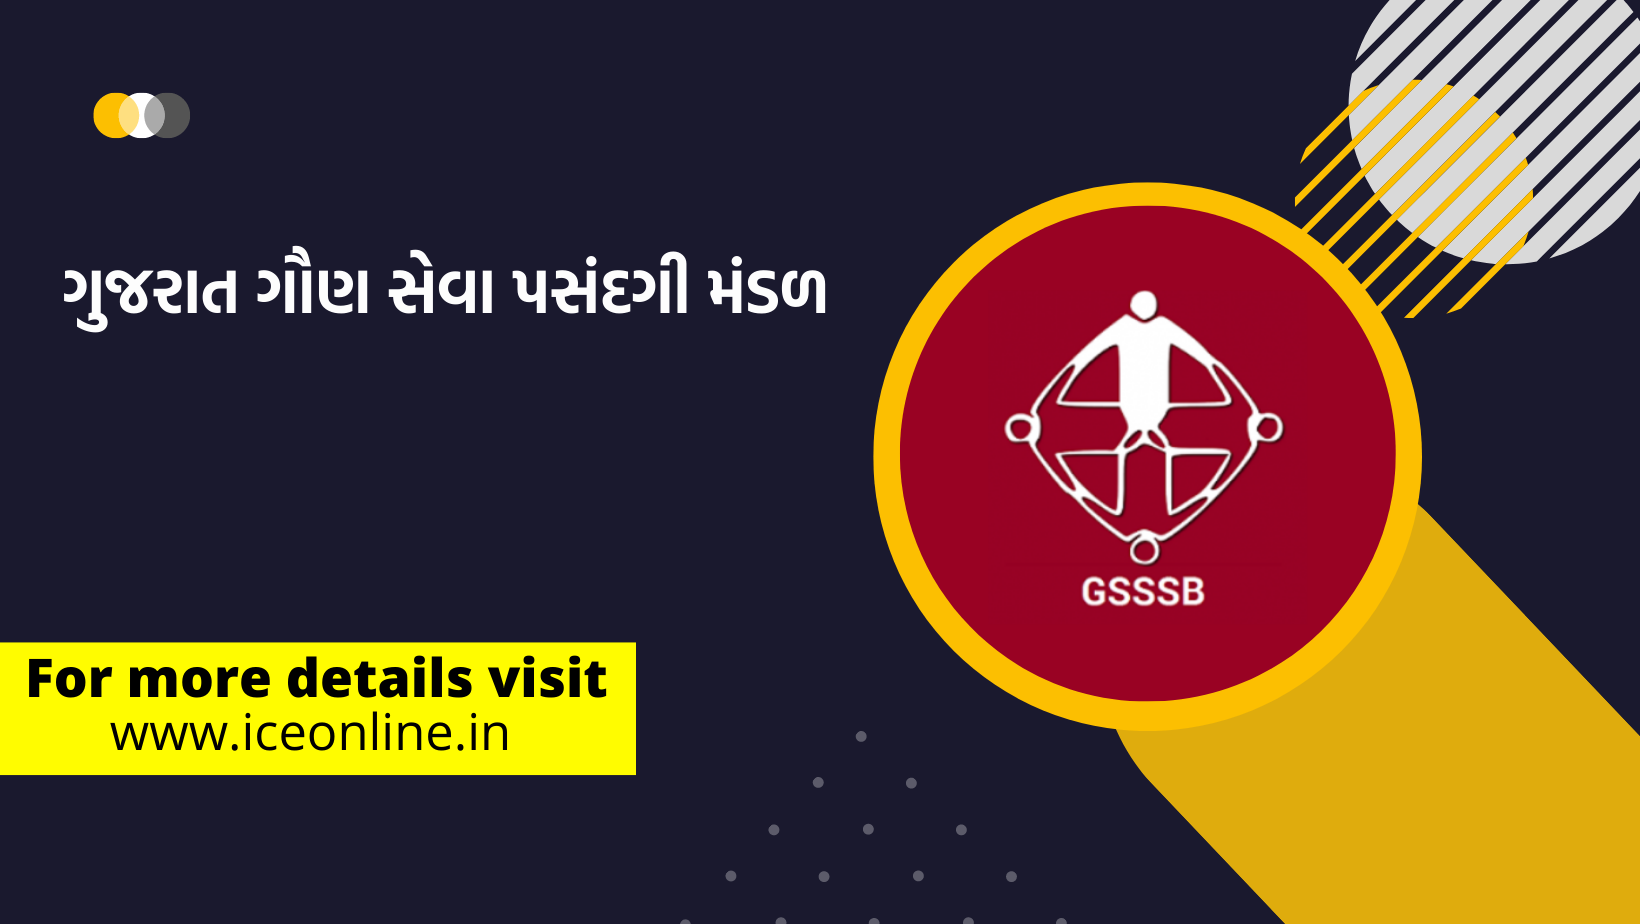 GSSSB - Bin Sachivalay CPT Call Later Download